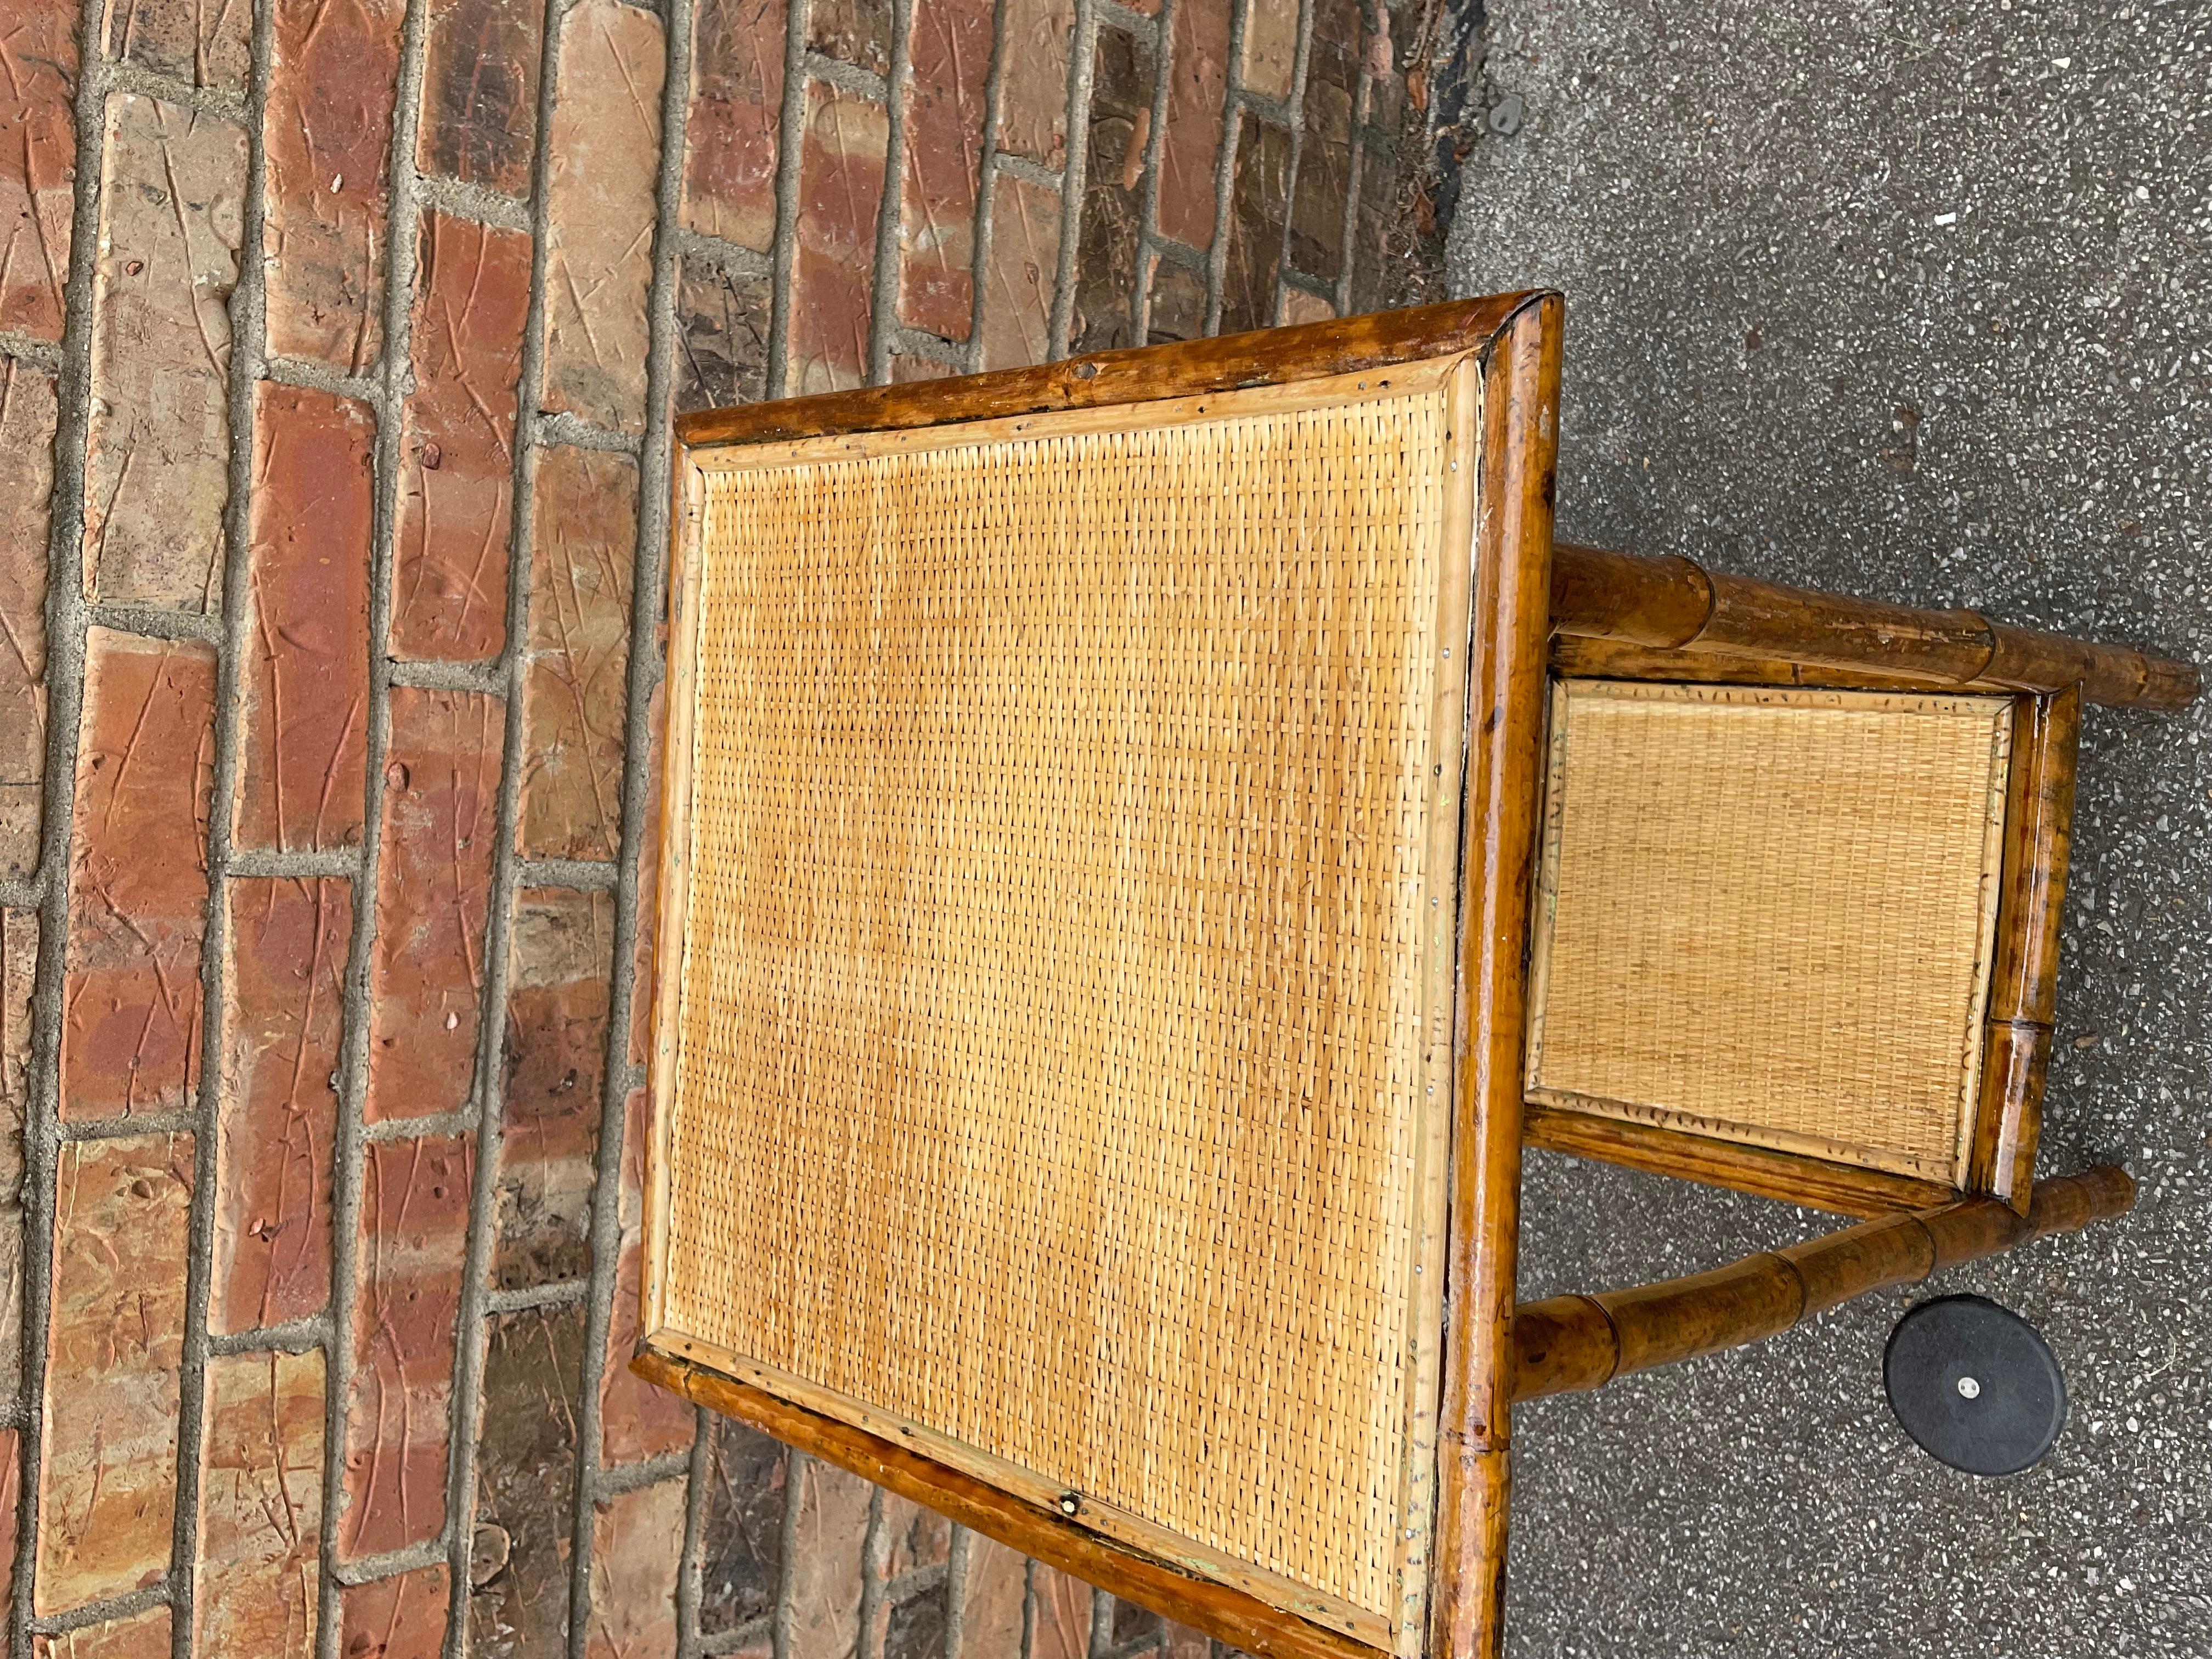 This is a beautiful 19th century English bamboo side table! Tables like these make excellent accent pieces because their color and style is so versatile. The dark hues of the burnt bamboo pair perfectly with the lighter golden of the rattan top and